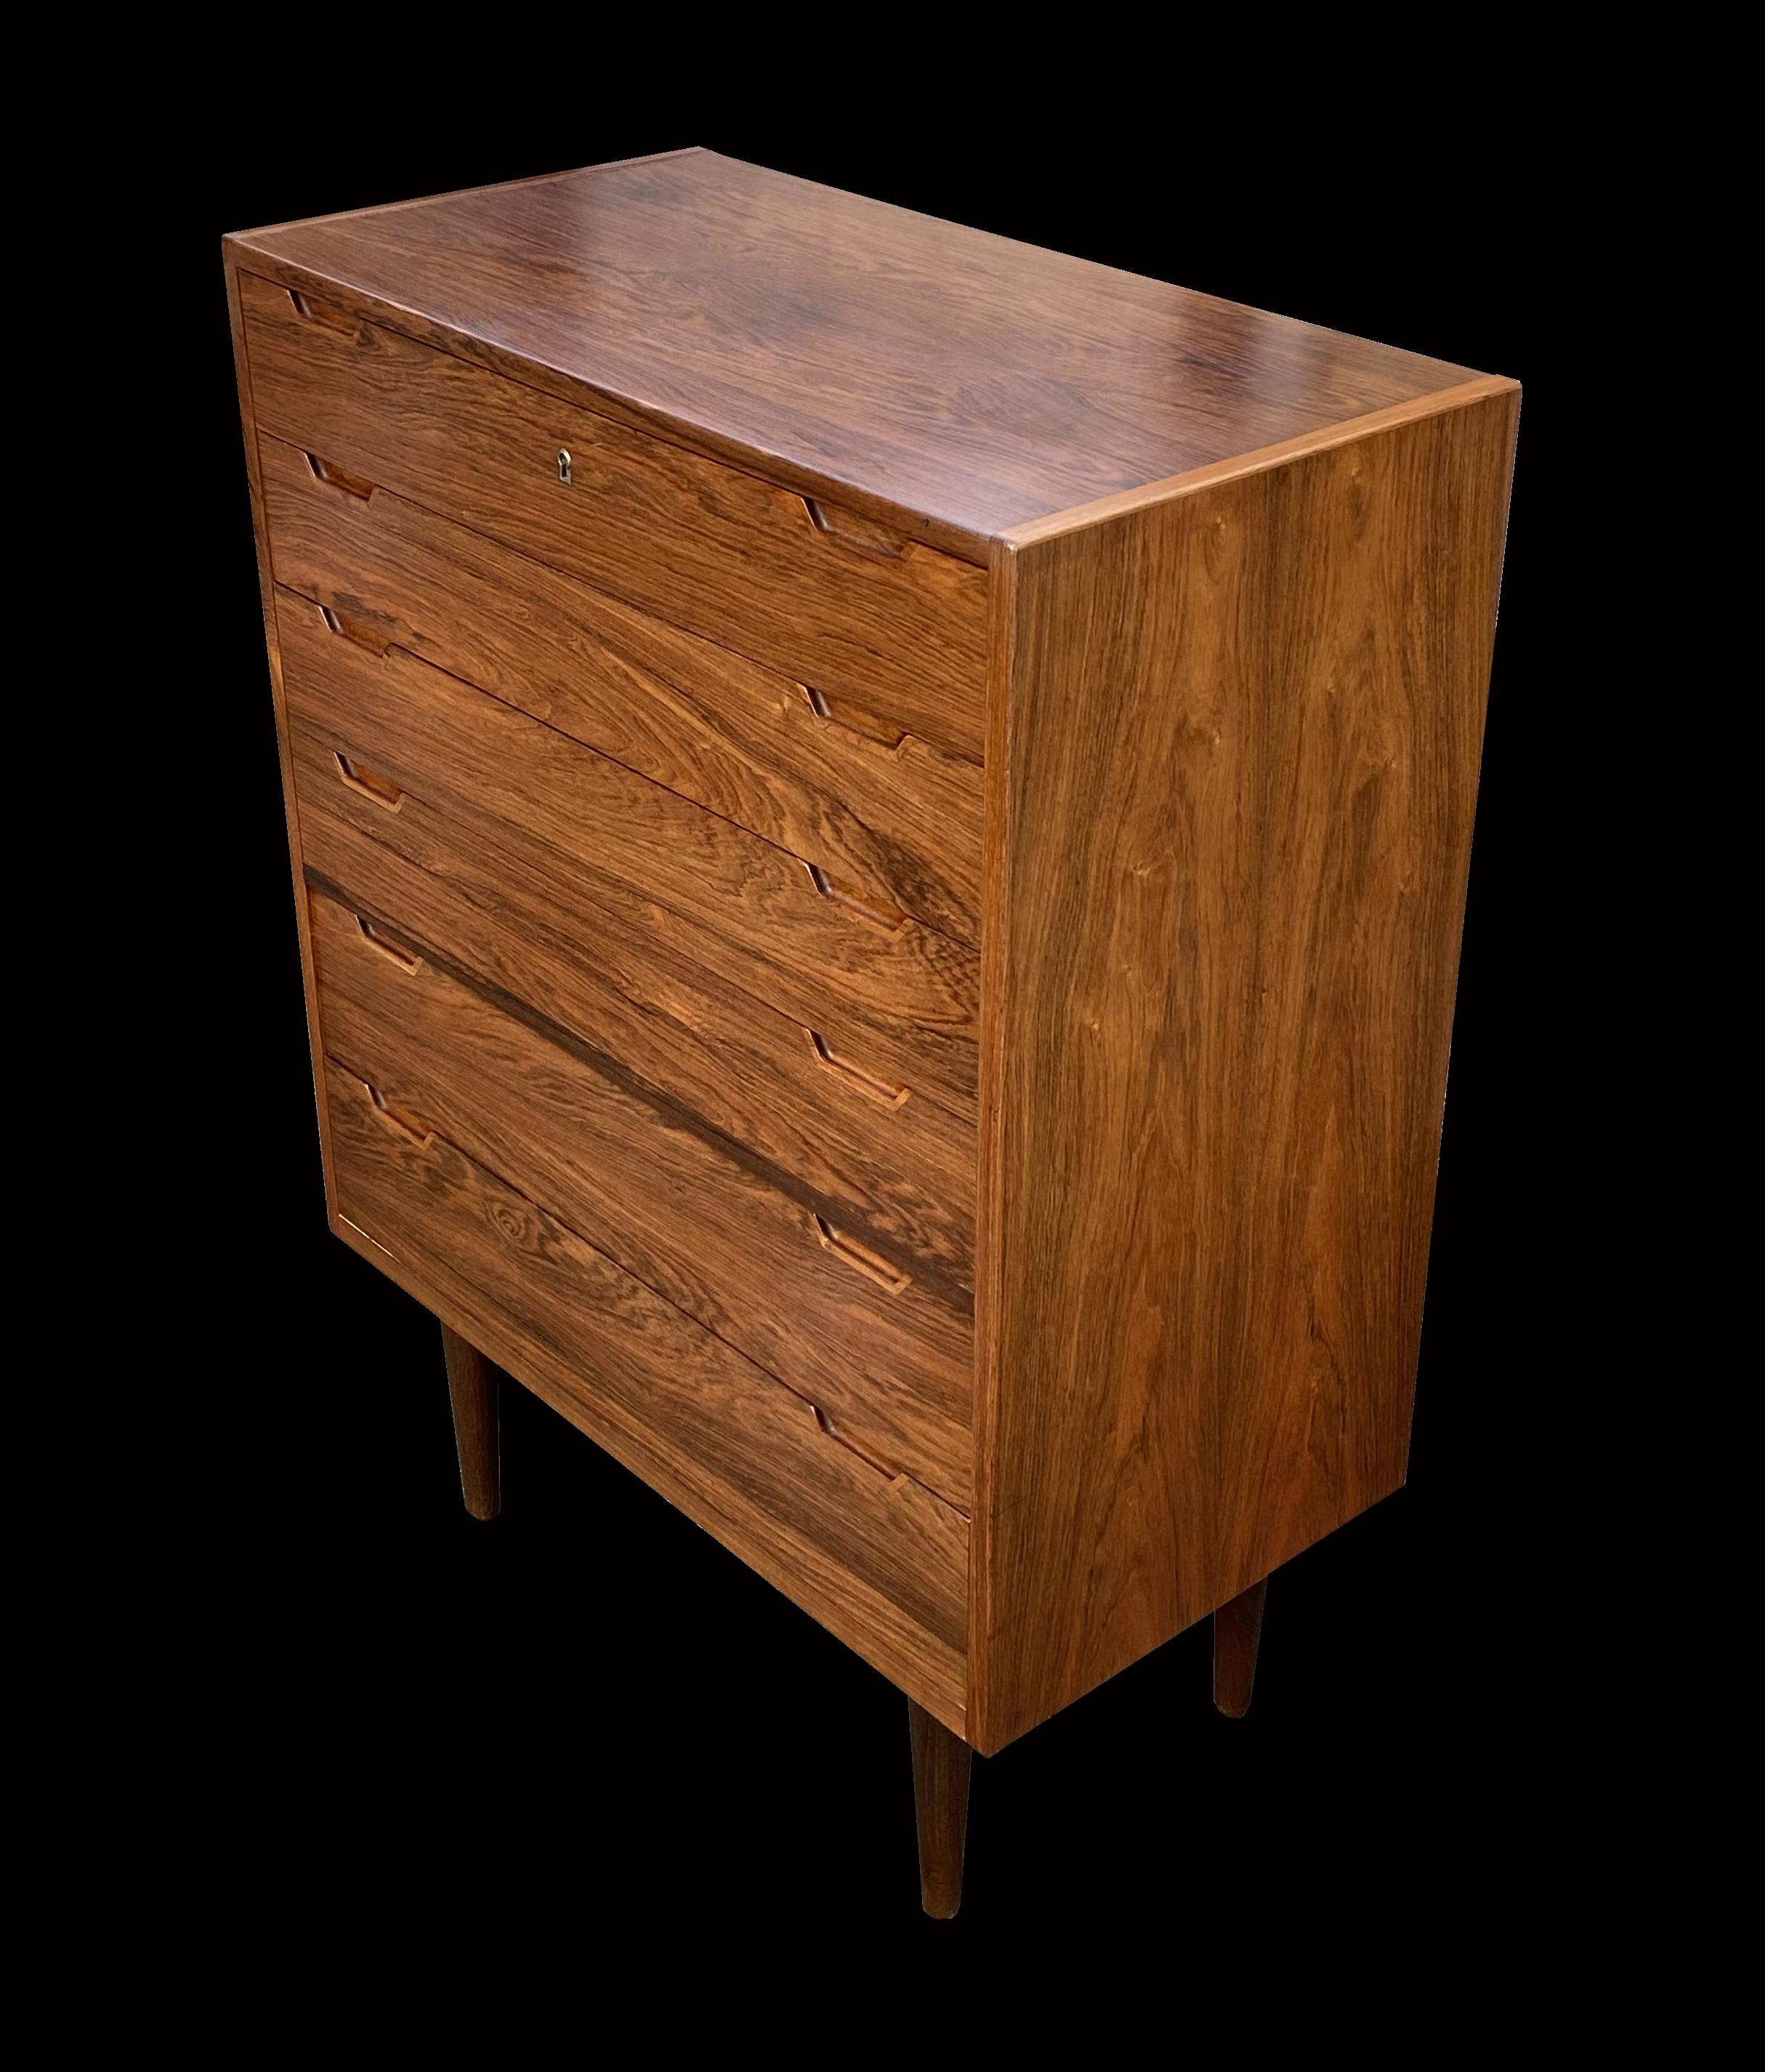 A very nice original example of this Classic design by Langkilde in good condition, it is made with Santos rosewood, which has a much nicer grain and color than Indian rosewood but is fortunately not listed by CITES so does not need a certificate